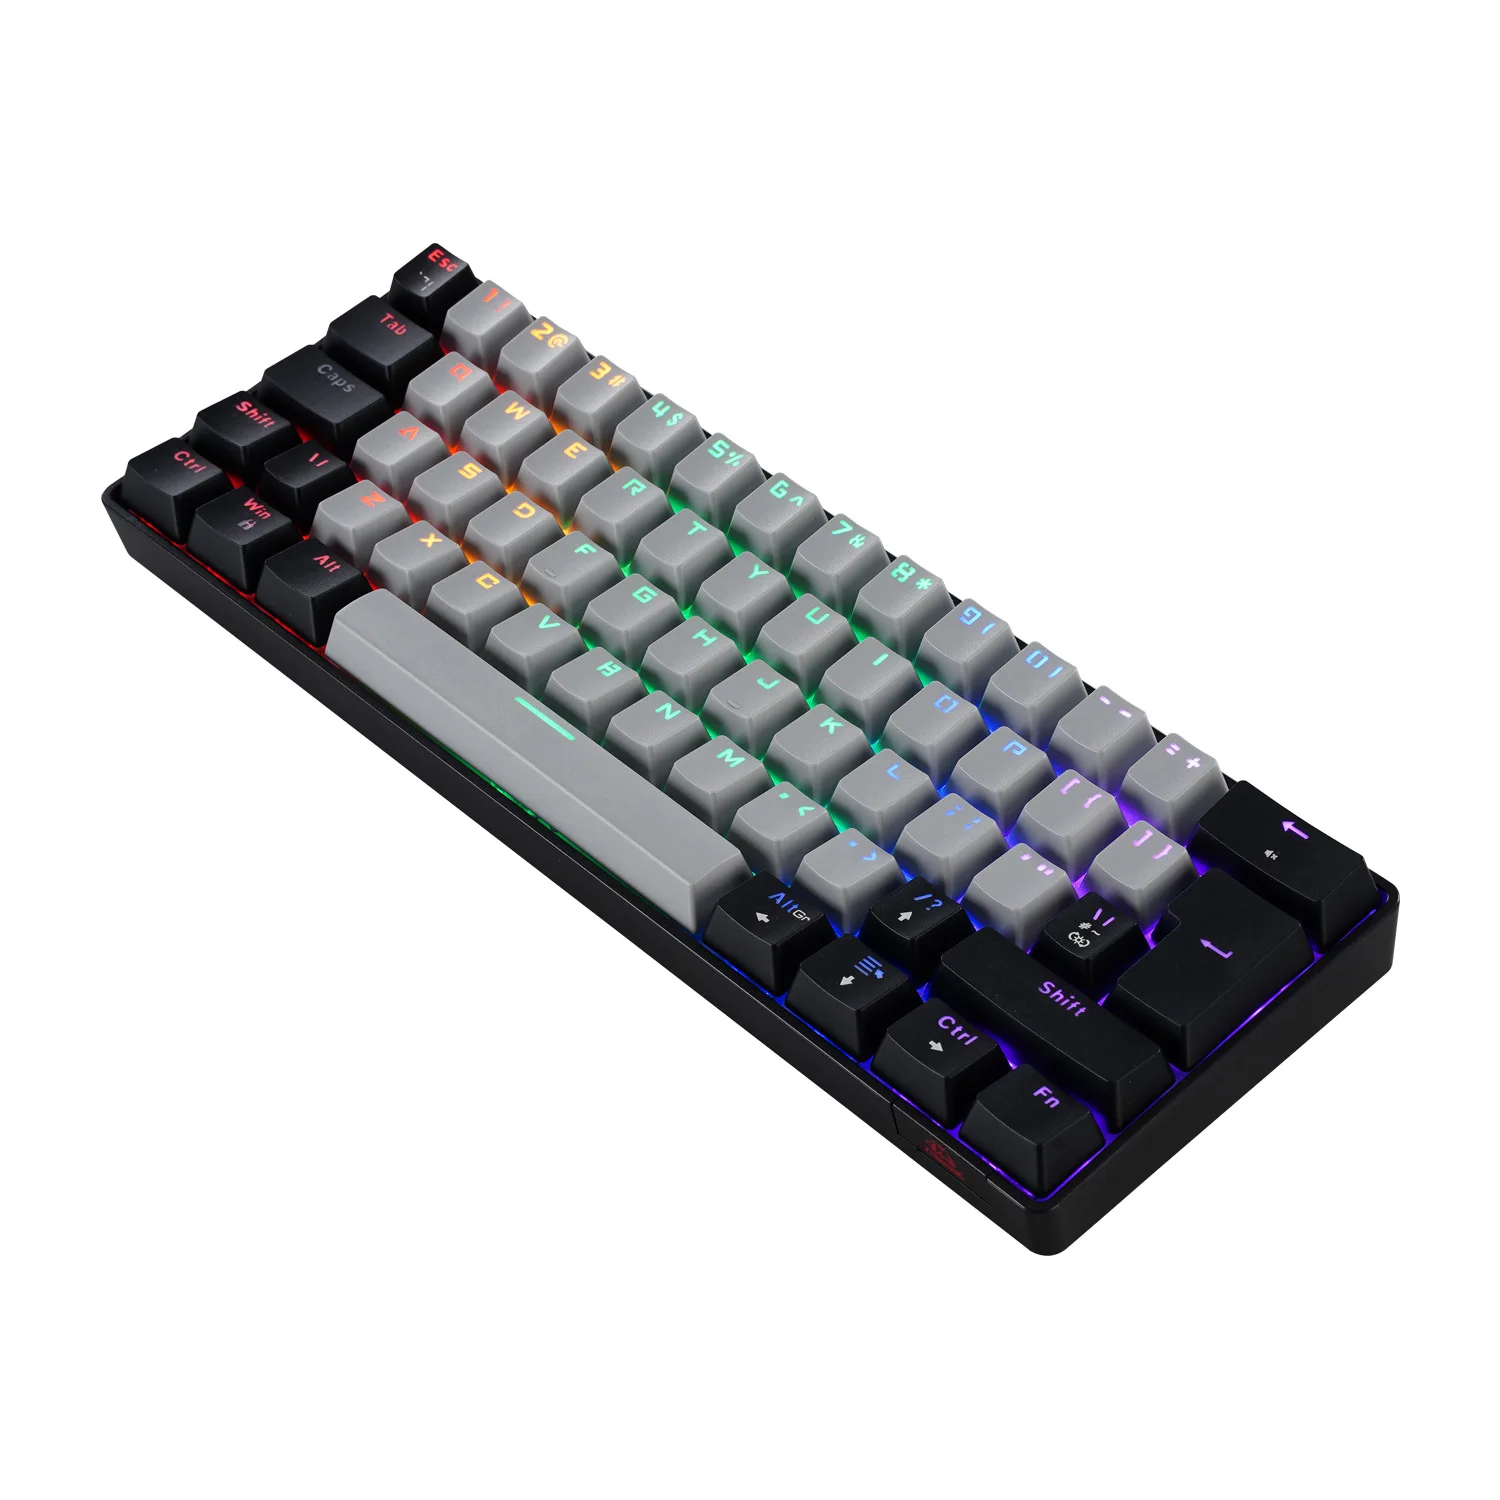 Perspectiva Nylon pegamento Portable 60% Iso Layout Wired Mechanical Keyboard,62 Keys,backlit Support -  Keyboards - AliExpress